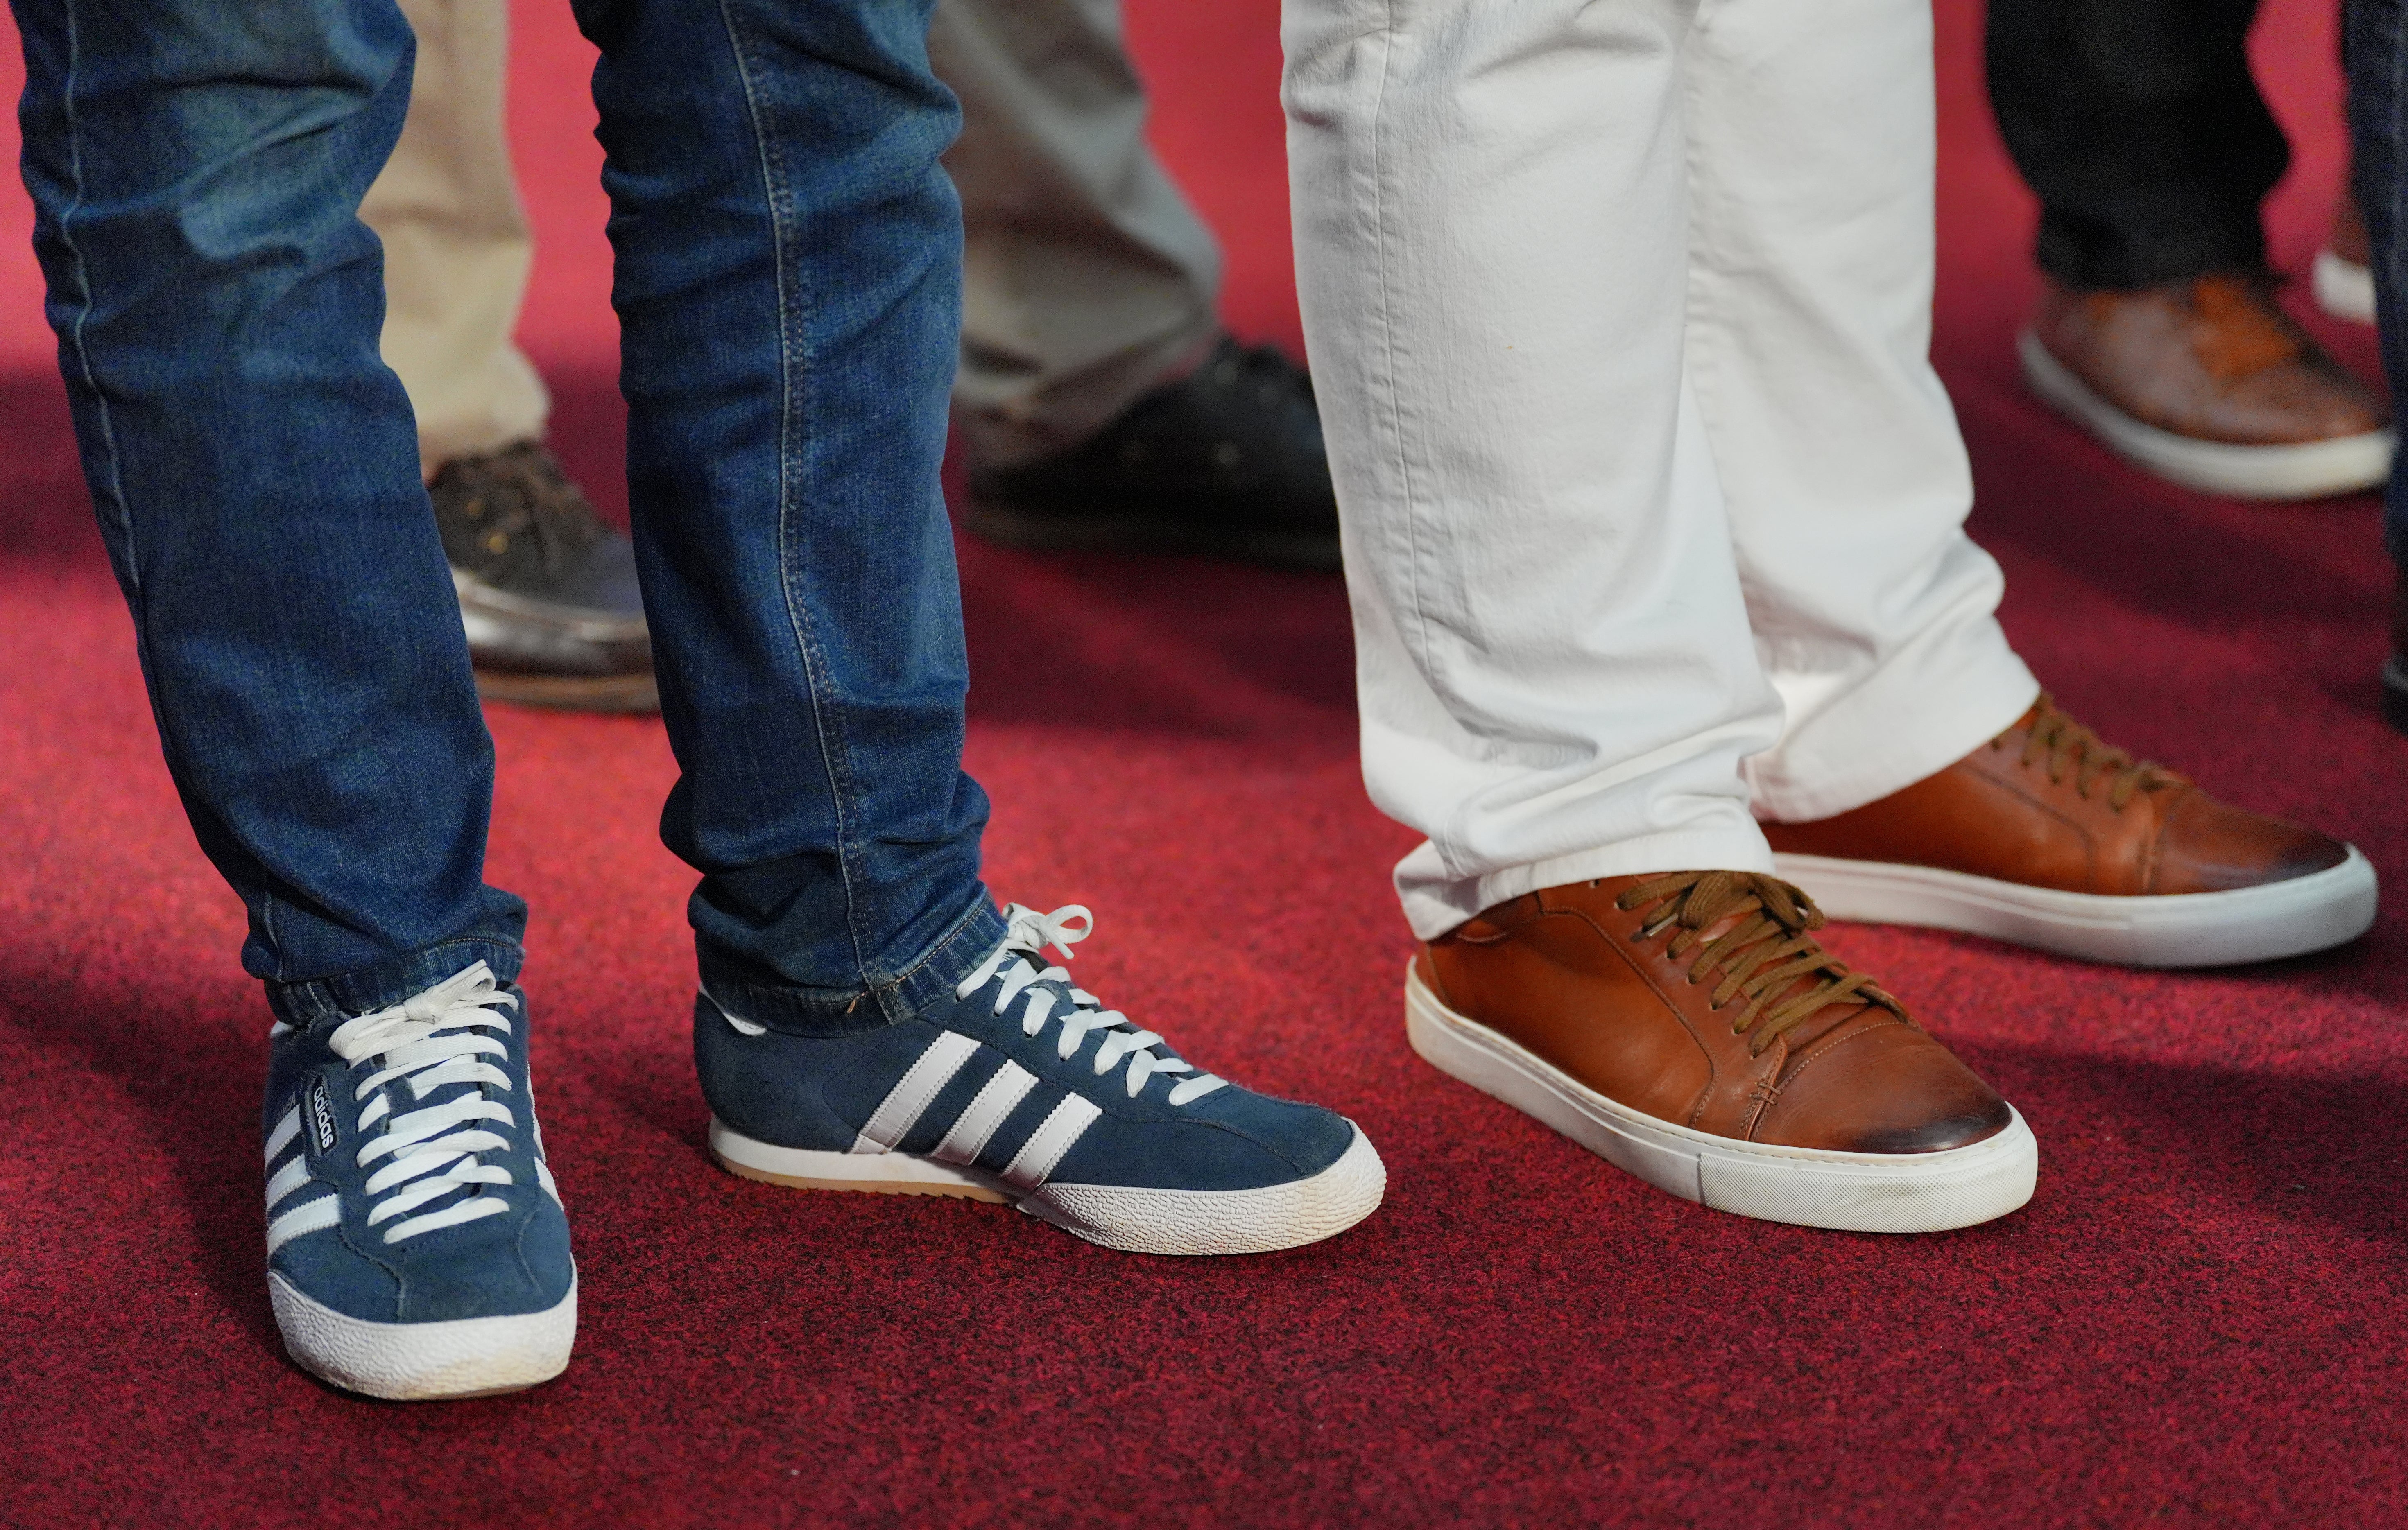 Both Sunak and Starmer have been spotted wearing Adidas Sambas – a shoe hailed as the style of the summer (Jonathan Brady/PA)